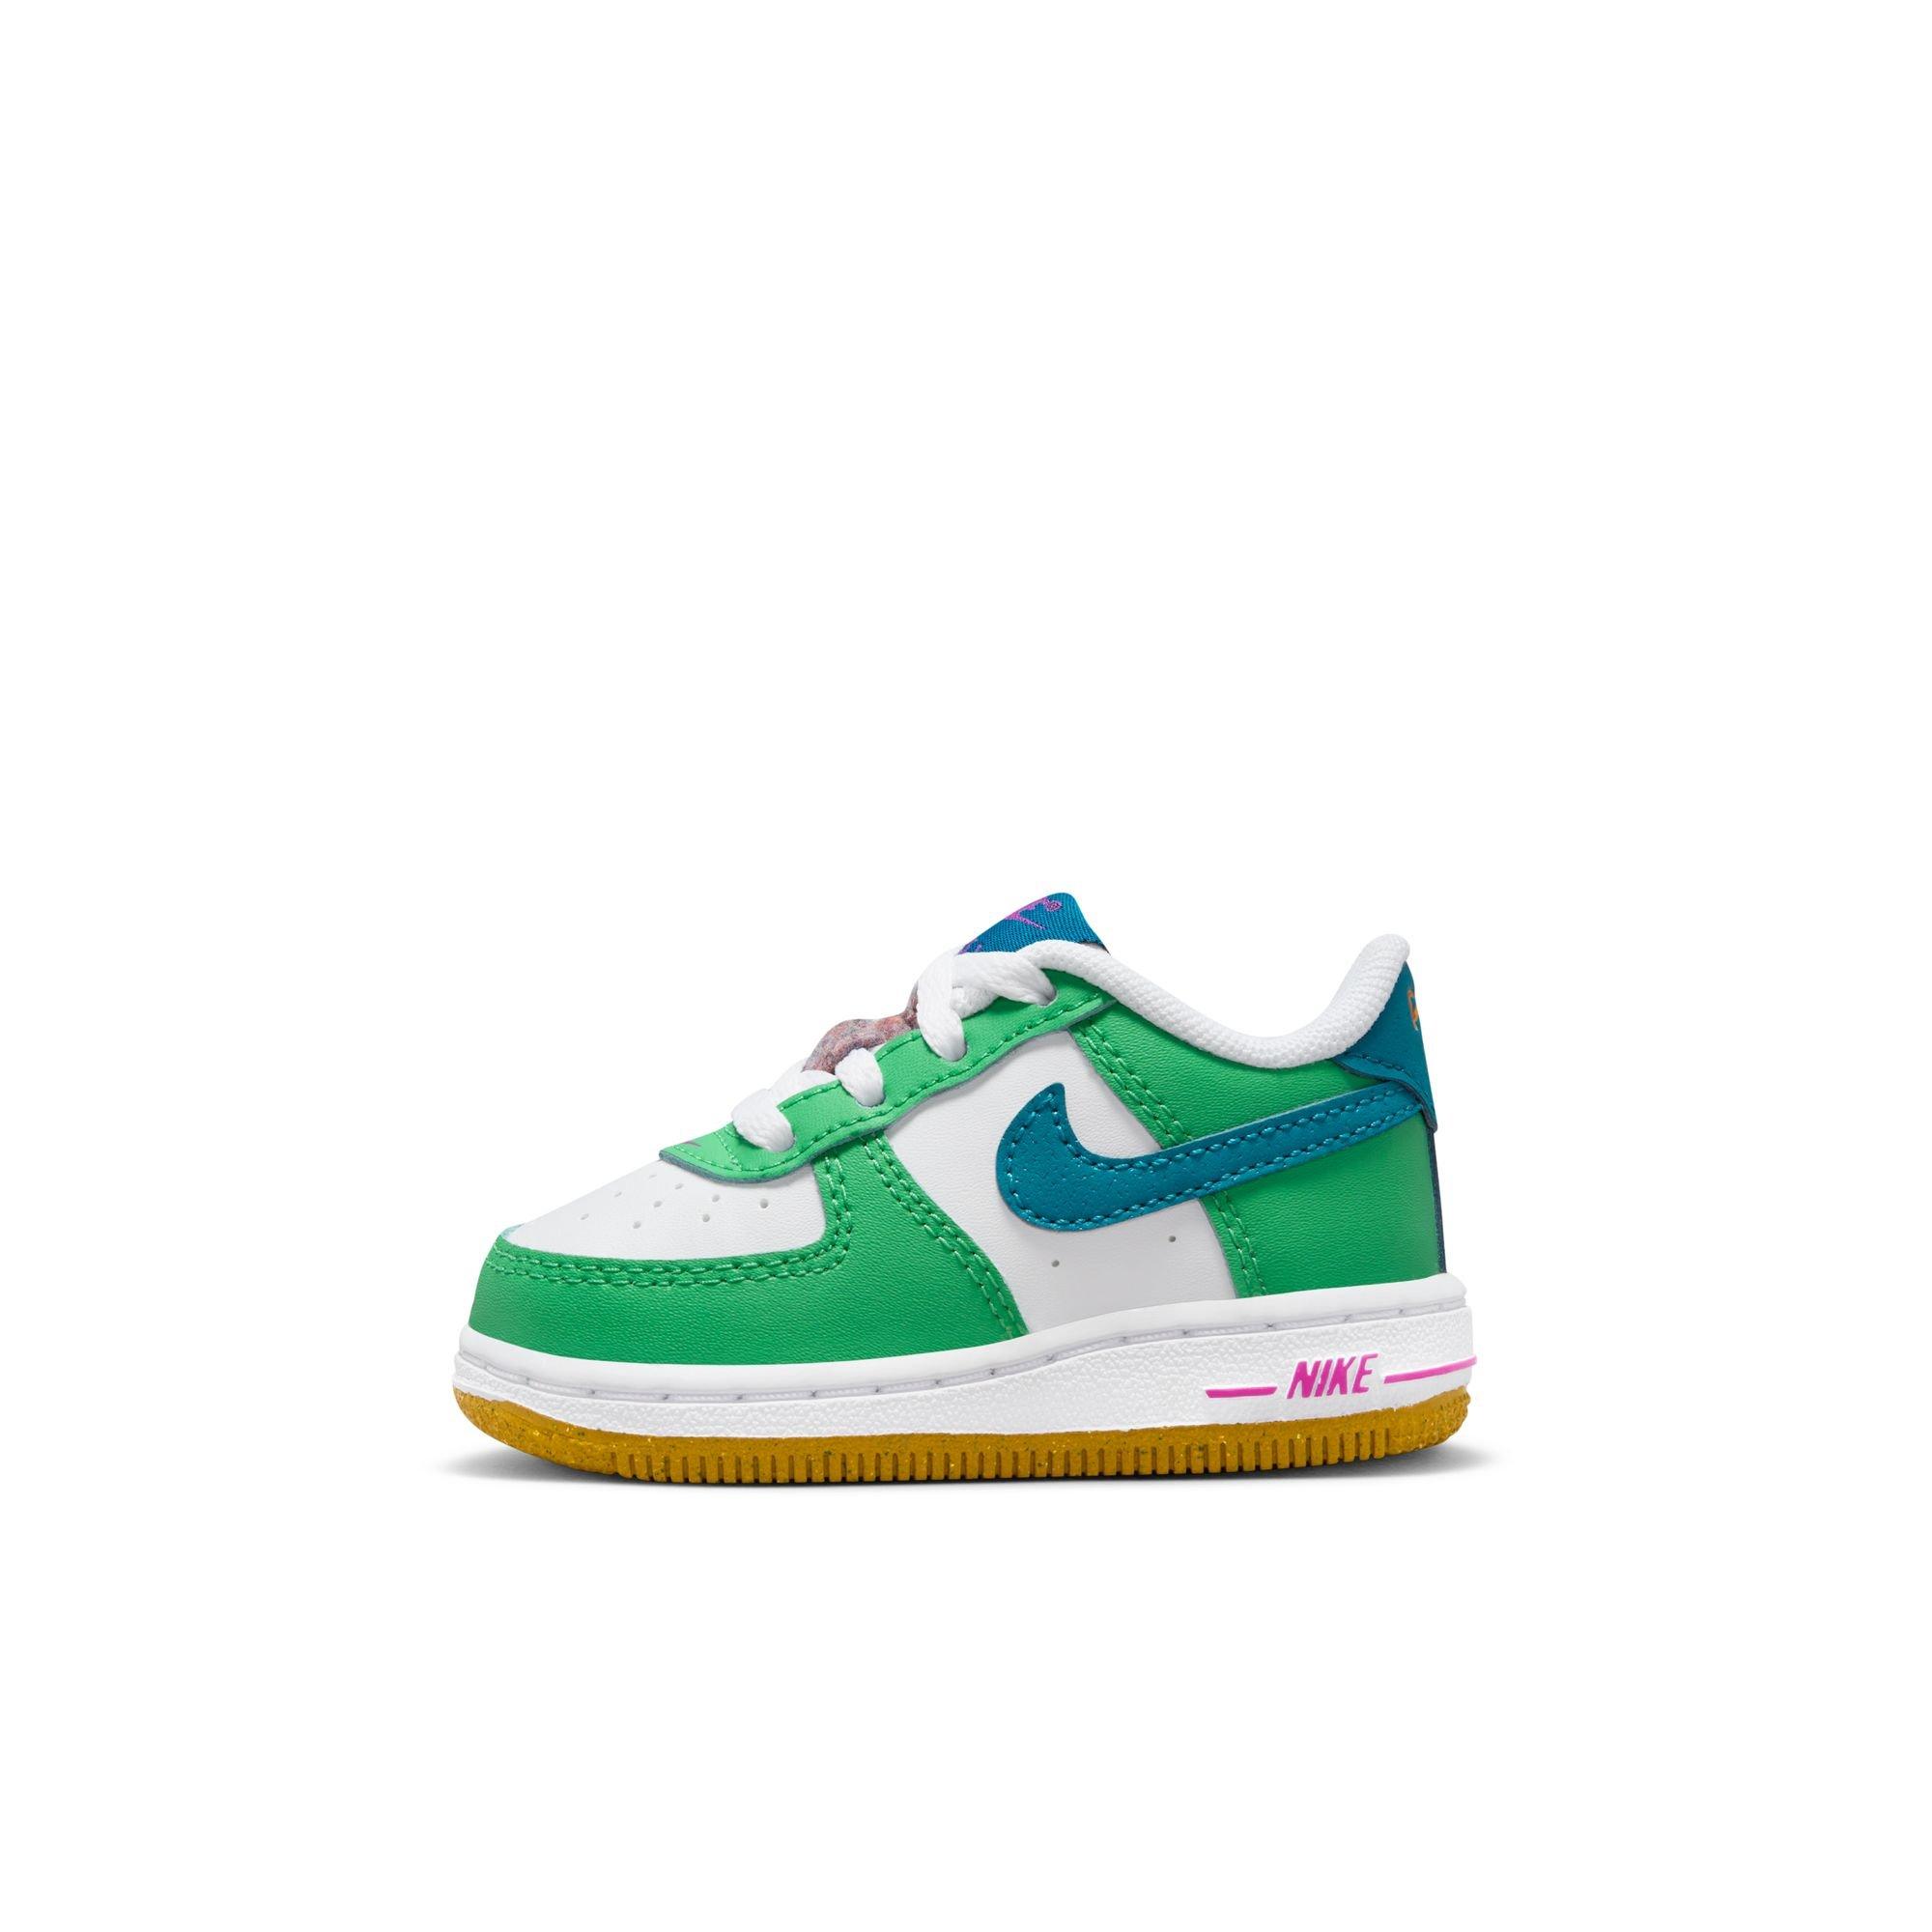 Nike Air Force 1 AF1 LV8 Utility Green AV4272-300 Sneakers size 2 youth  green